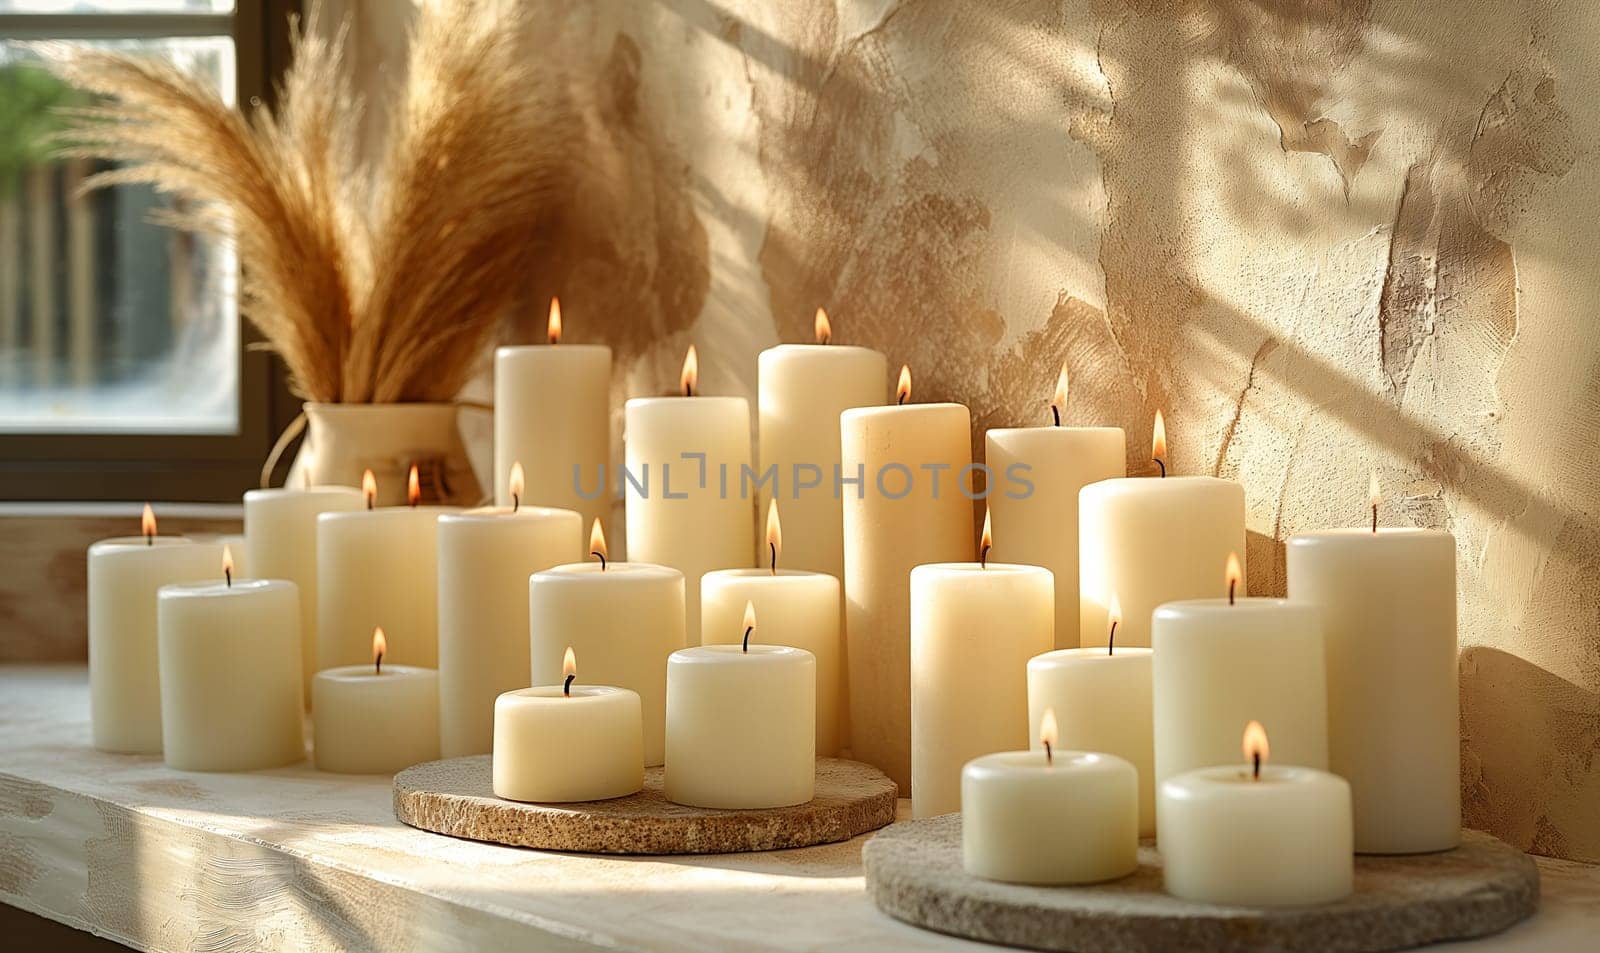 Group of White Candles on Wooden Table. by Fischeron